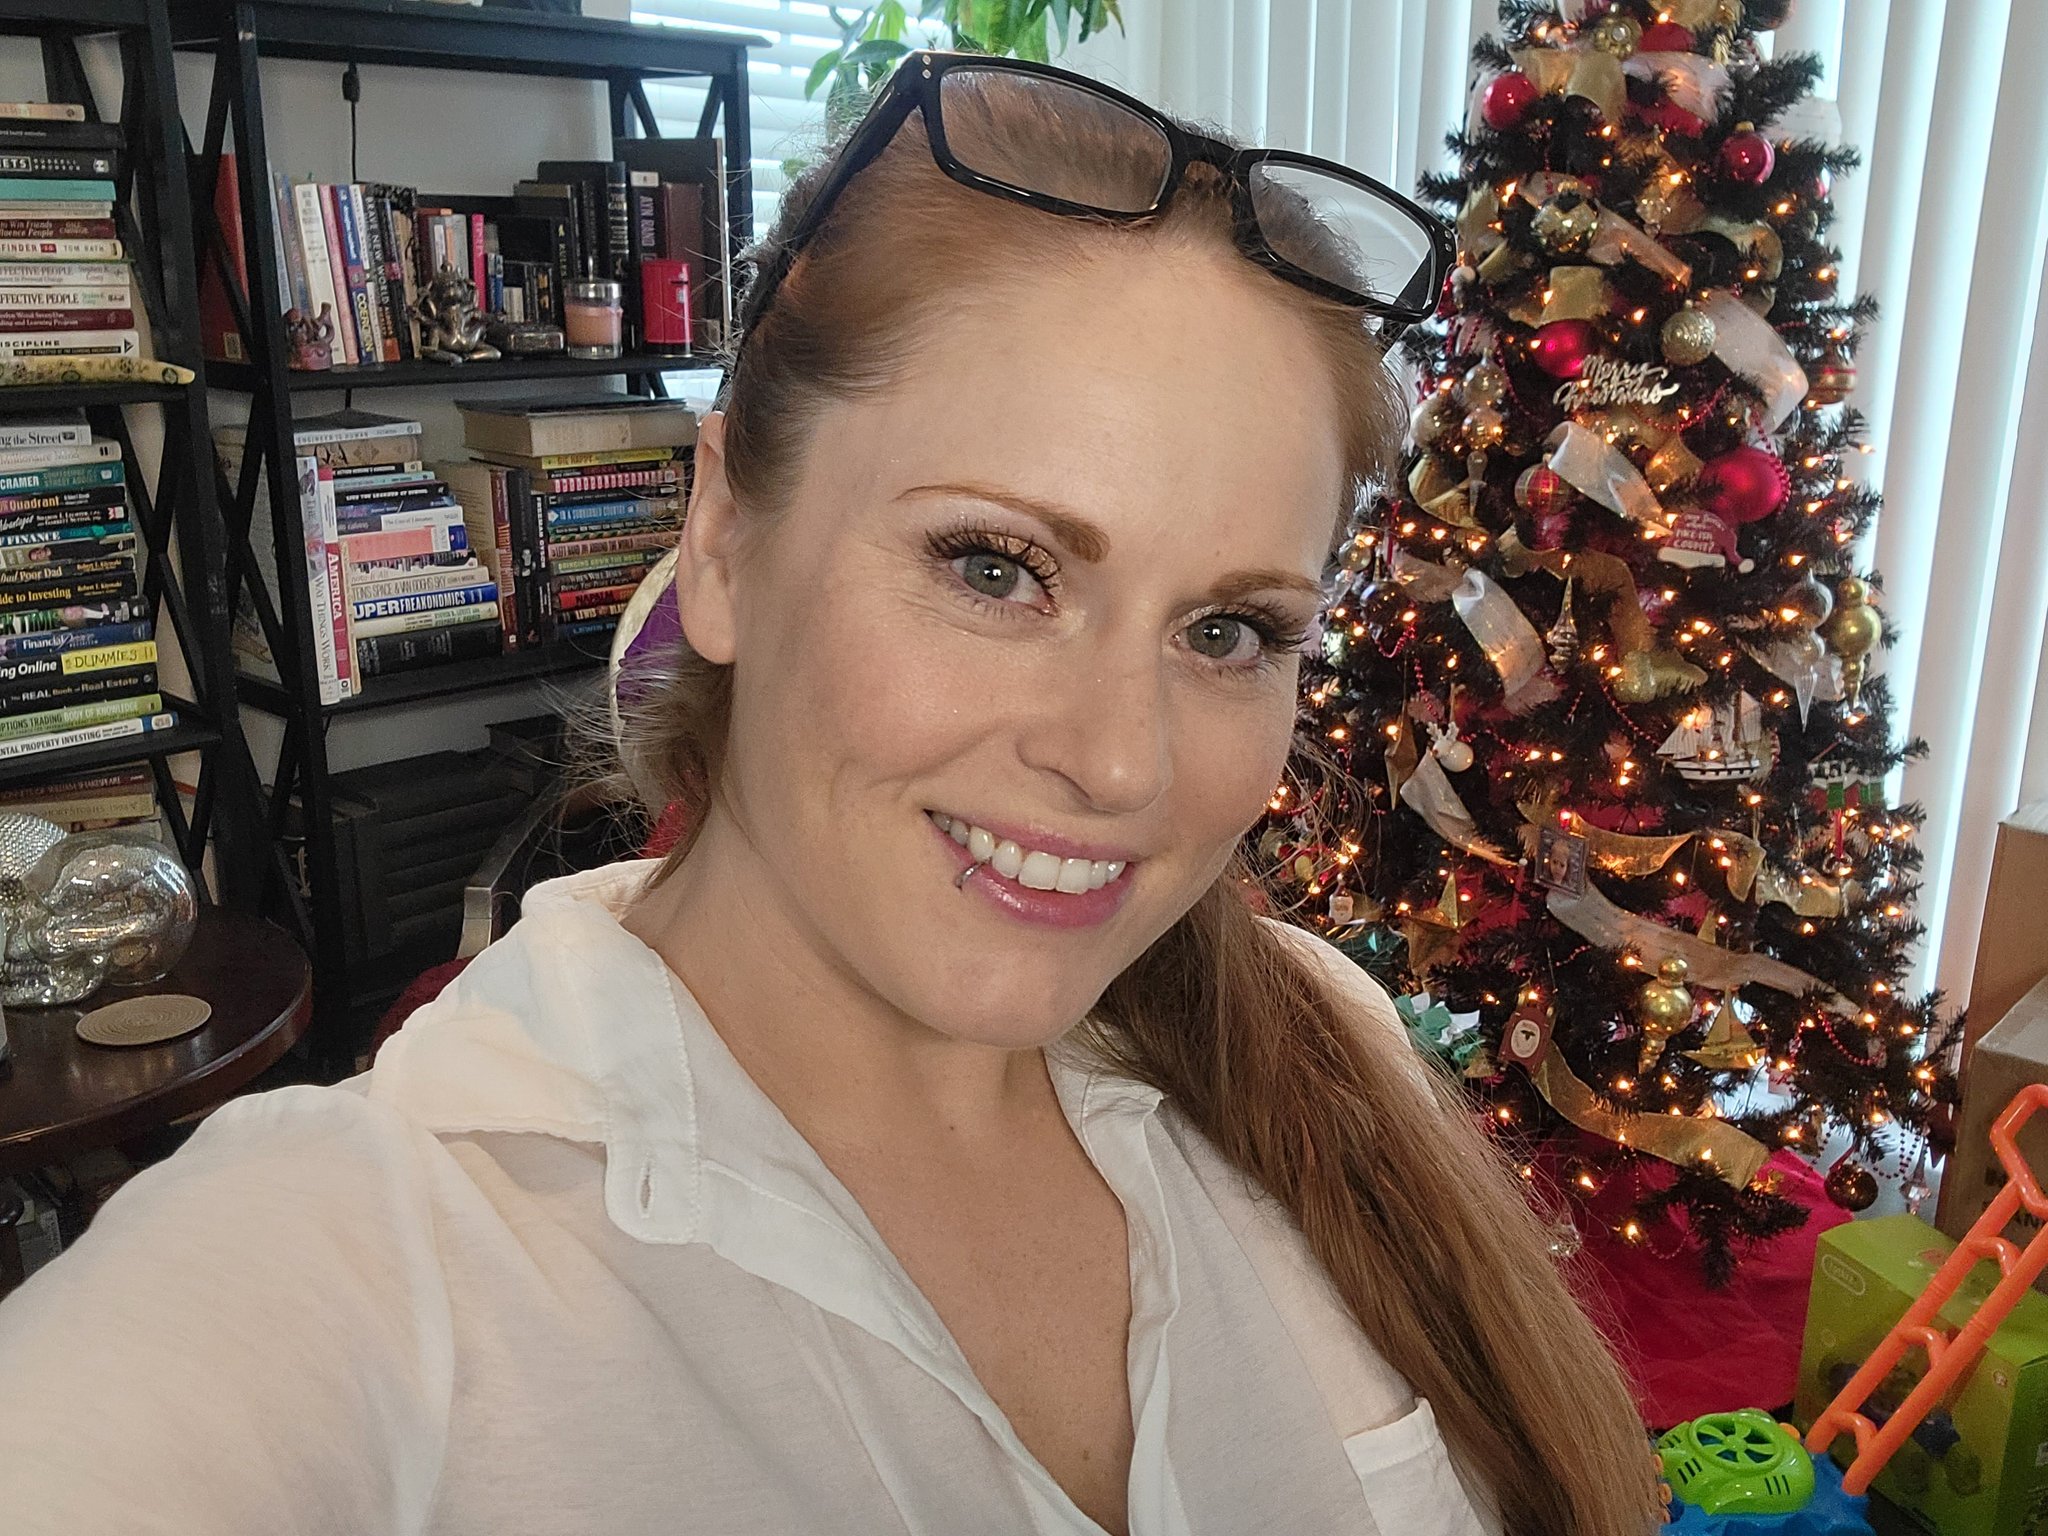 Tw Pornstars Chrissy Leblanc Twitter I M Live On Cam Now Join Me Eplaystreamers